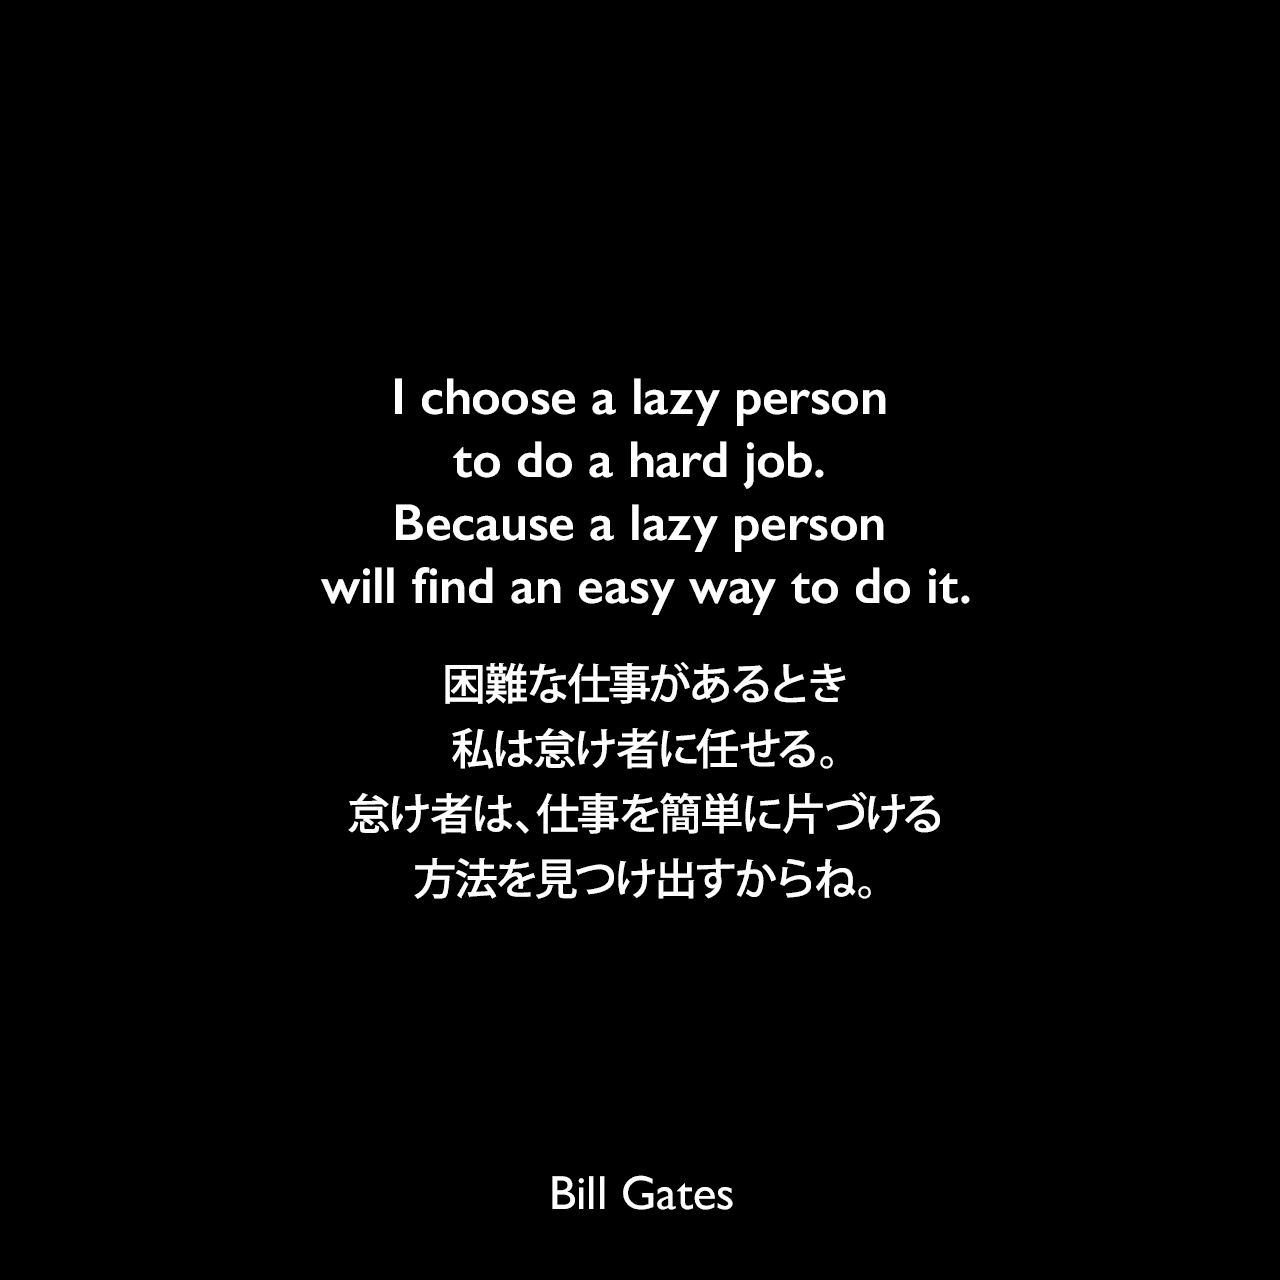 I choose a lazy person to do a hard job. Because a lazy person will find an easy way to do it.困難な仕事があるとき、私は怠け者に任せる。怠け者は、仕事を簡単に片づける方法を見つけ出すからね。Bill Gates